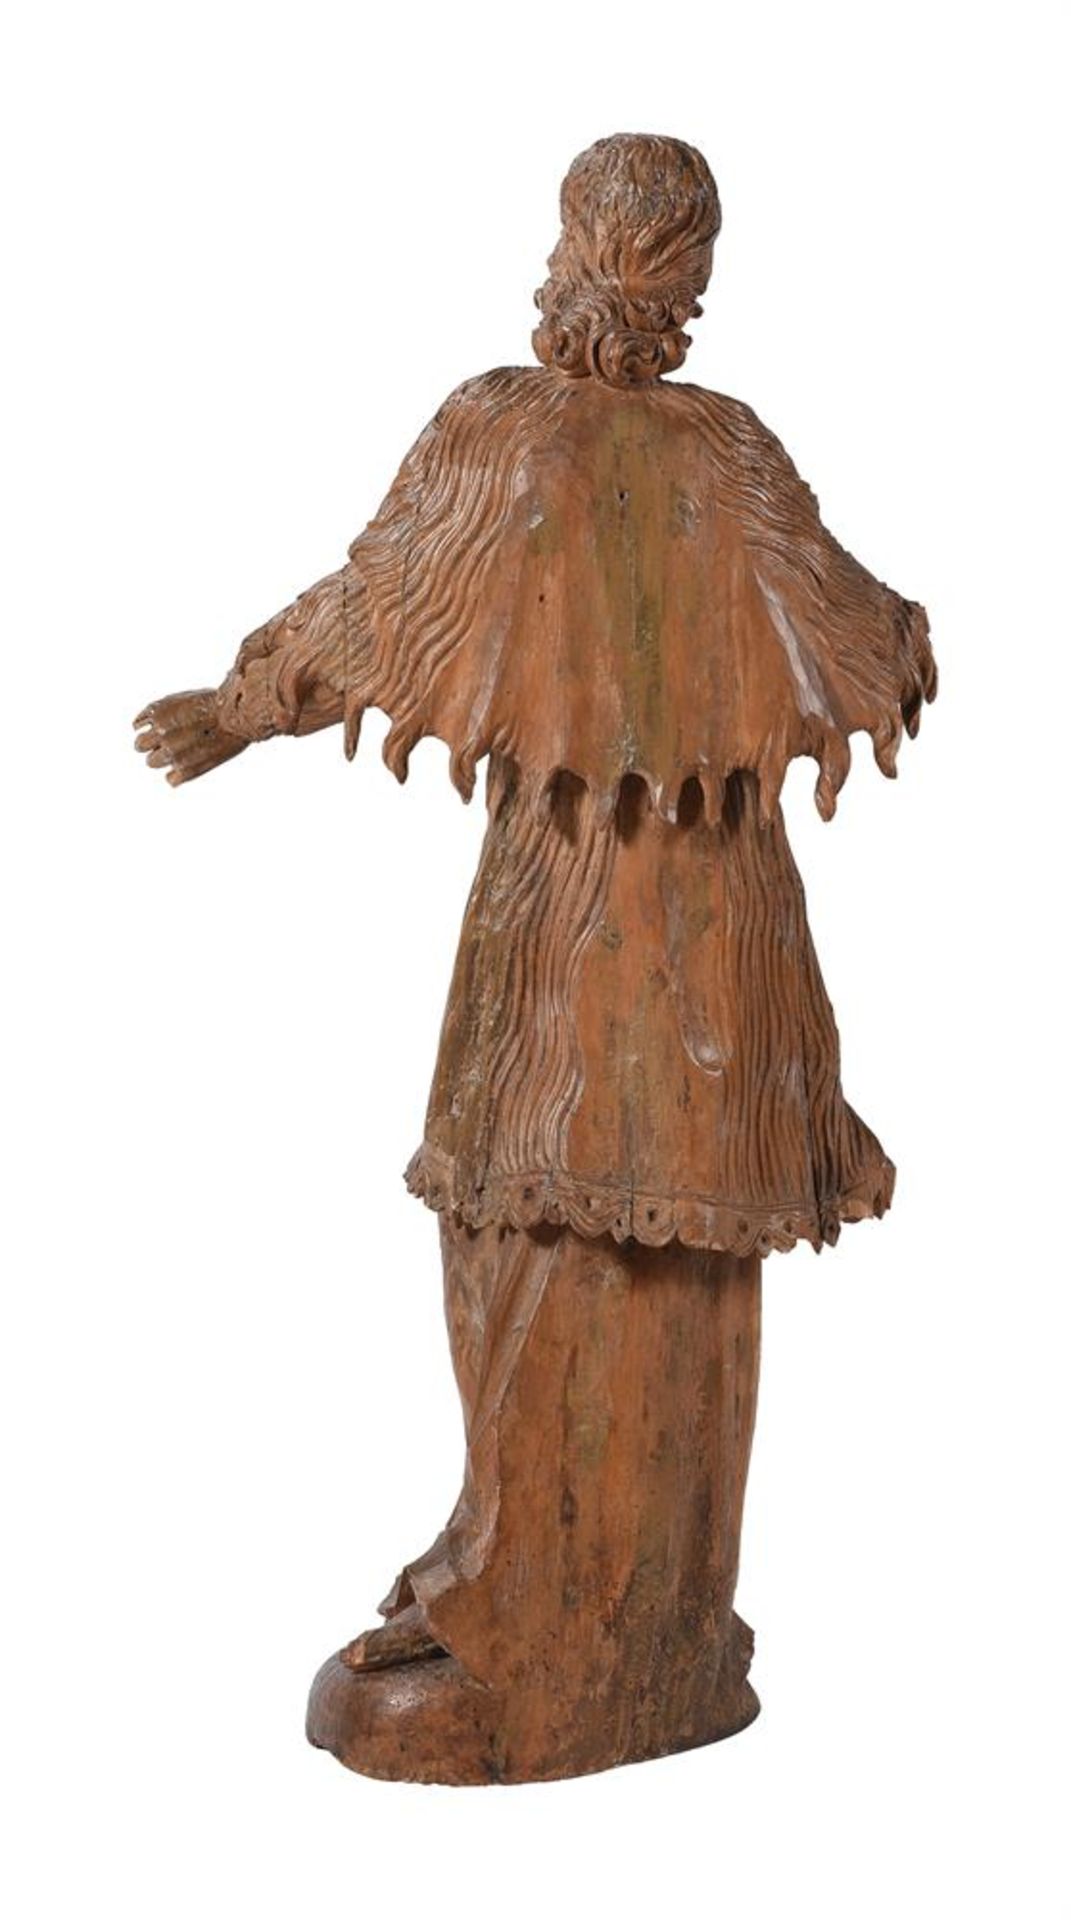 A CARVED LIMEWOOD FIGURE OF A STANDING APOSTOLIC FIGURE SWISS OR SOUTH GERMAN, 17TH CENTURY - Image 3 of 3